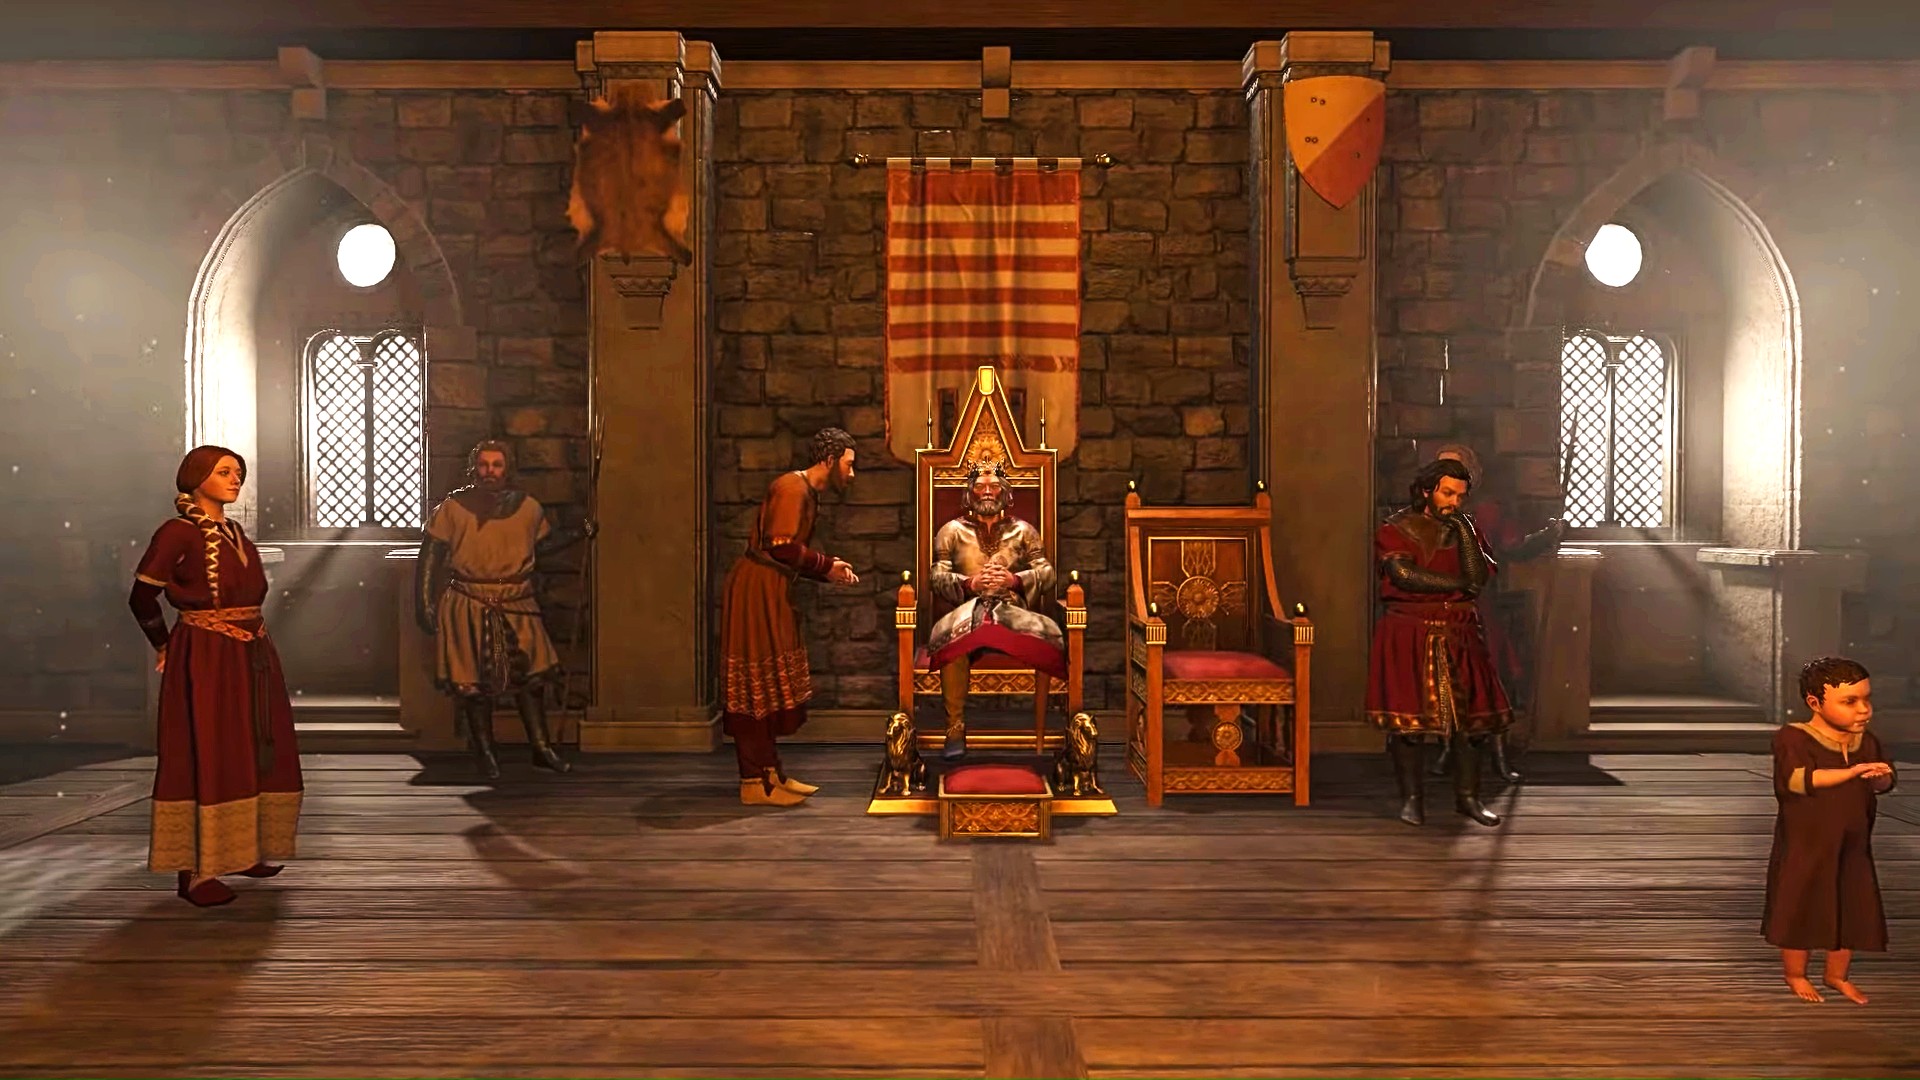 Crusader Kings 3: Royal Court release date announced (for real)